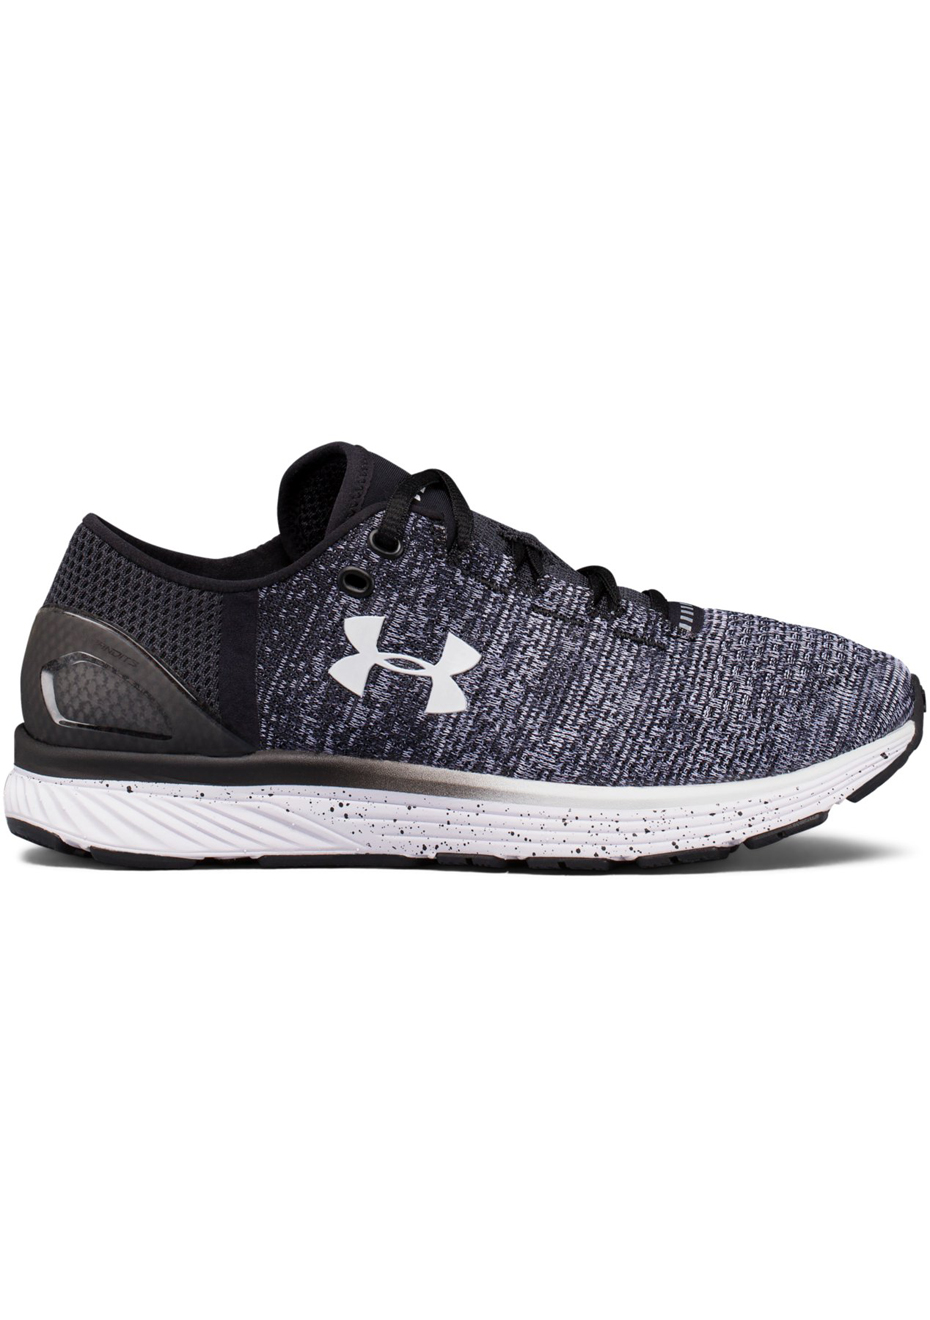 under armour men's deception mid molded metal baseball cleats